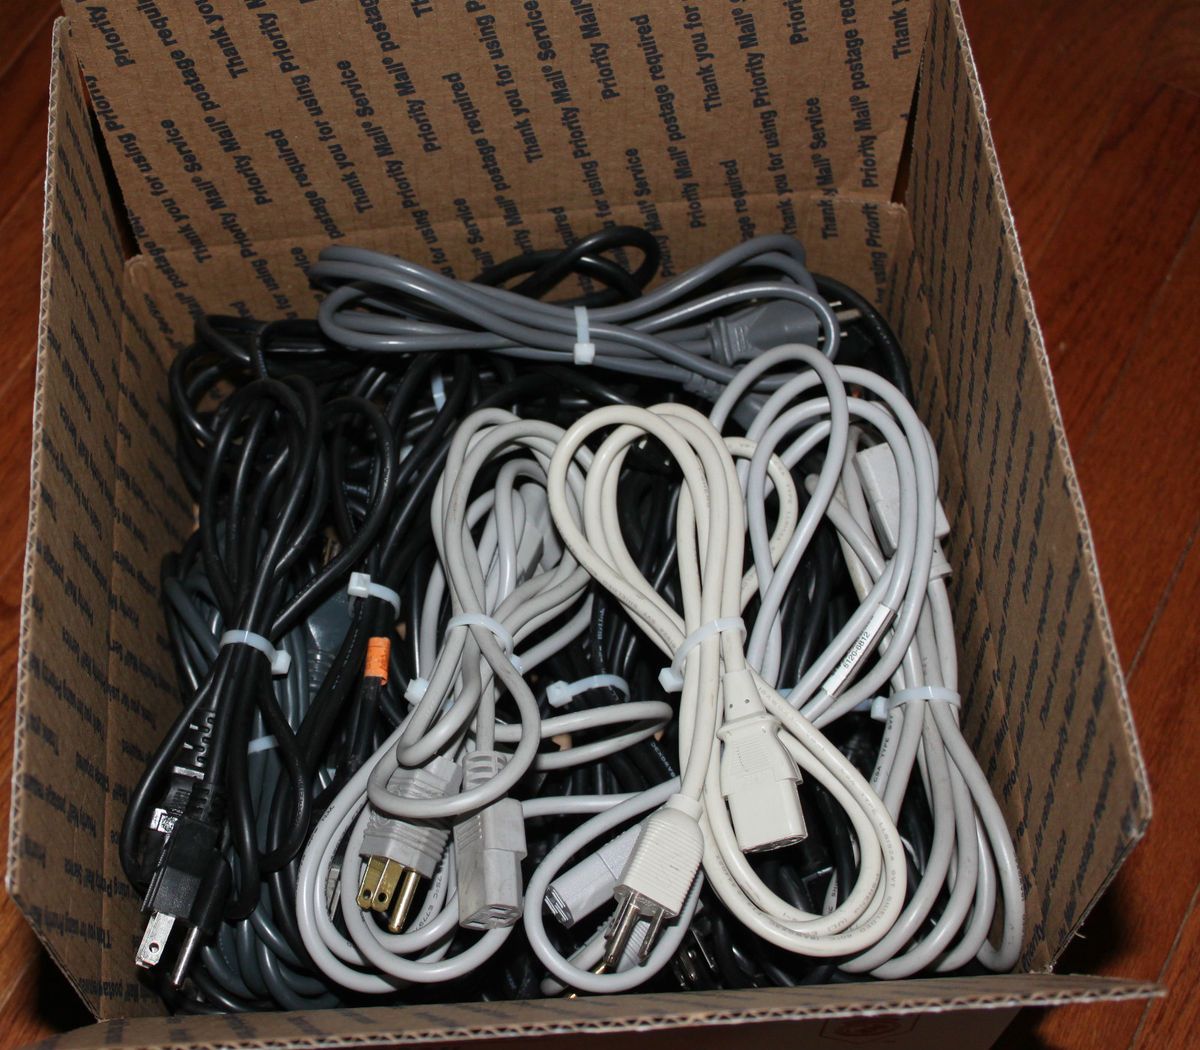 Lot of 25 3 Prong 6ft AC Power Cord Cables For PC Desktop Computer 